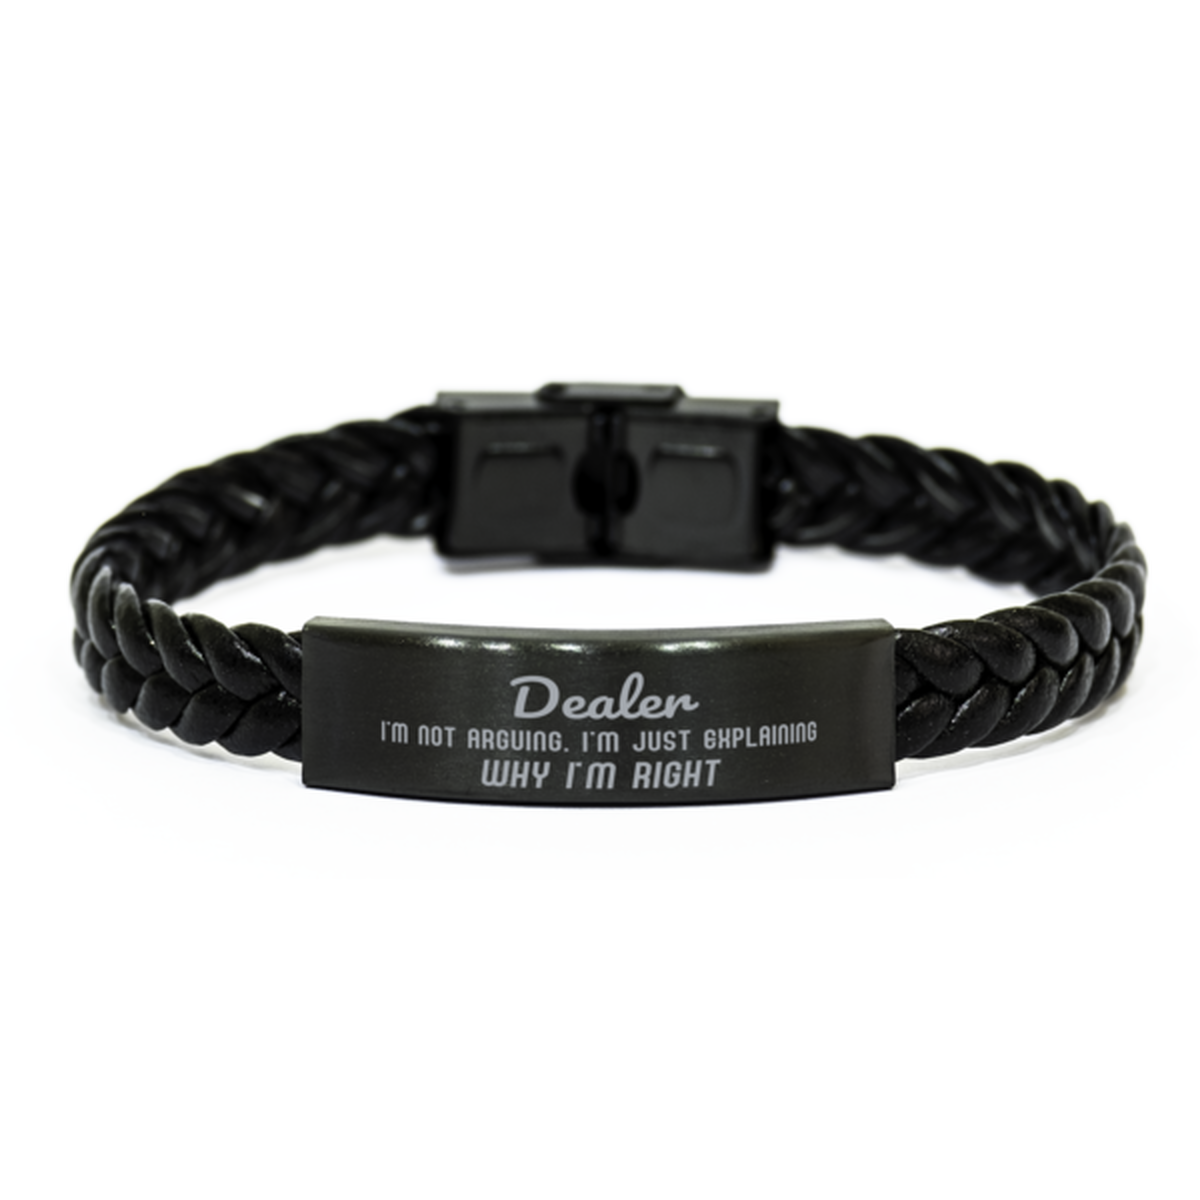 Dealer I'm not Arguing. I'm Just Explaining Why I'm RIGHT Braided Leather Bracelet, Graduation Birthday Christmas Dealer Gifts For Dealer Funny Saying Quote Present for Men Women Coworker